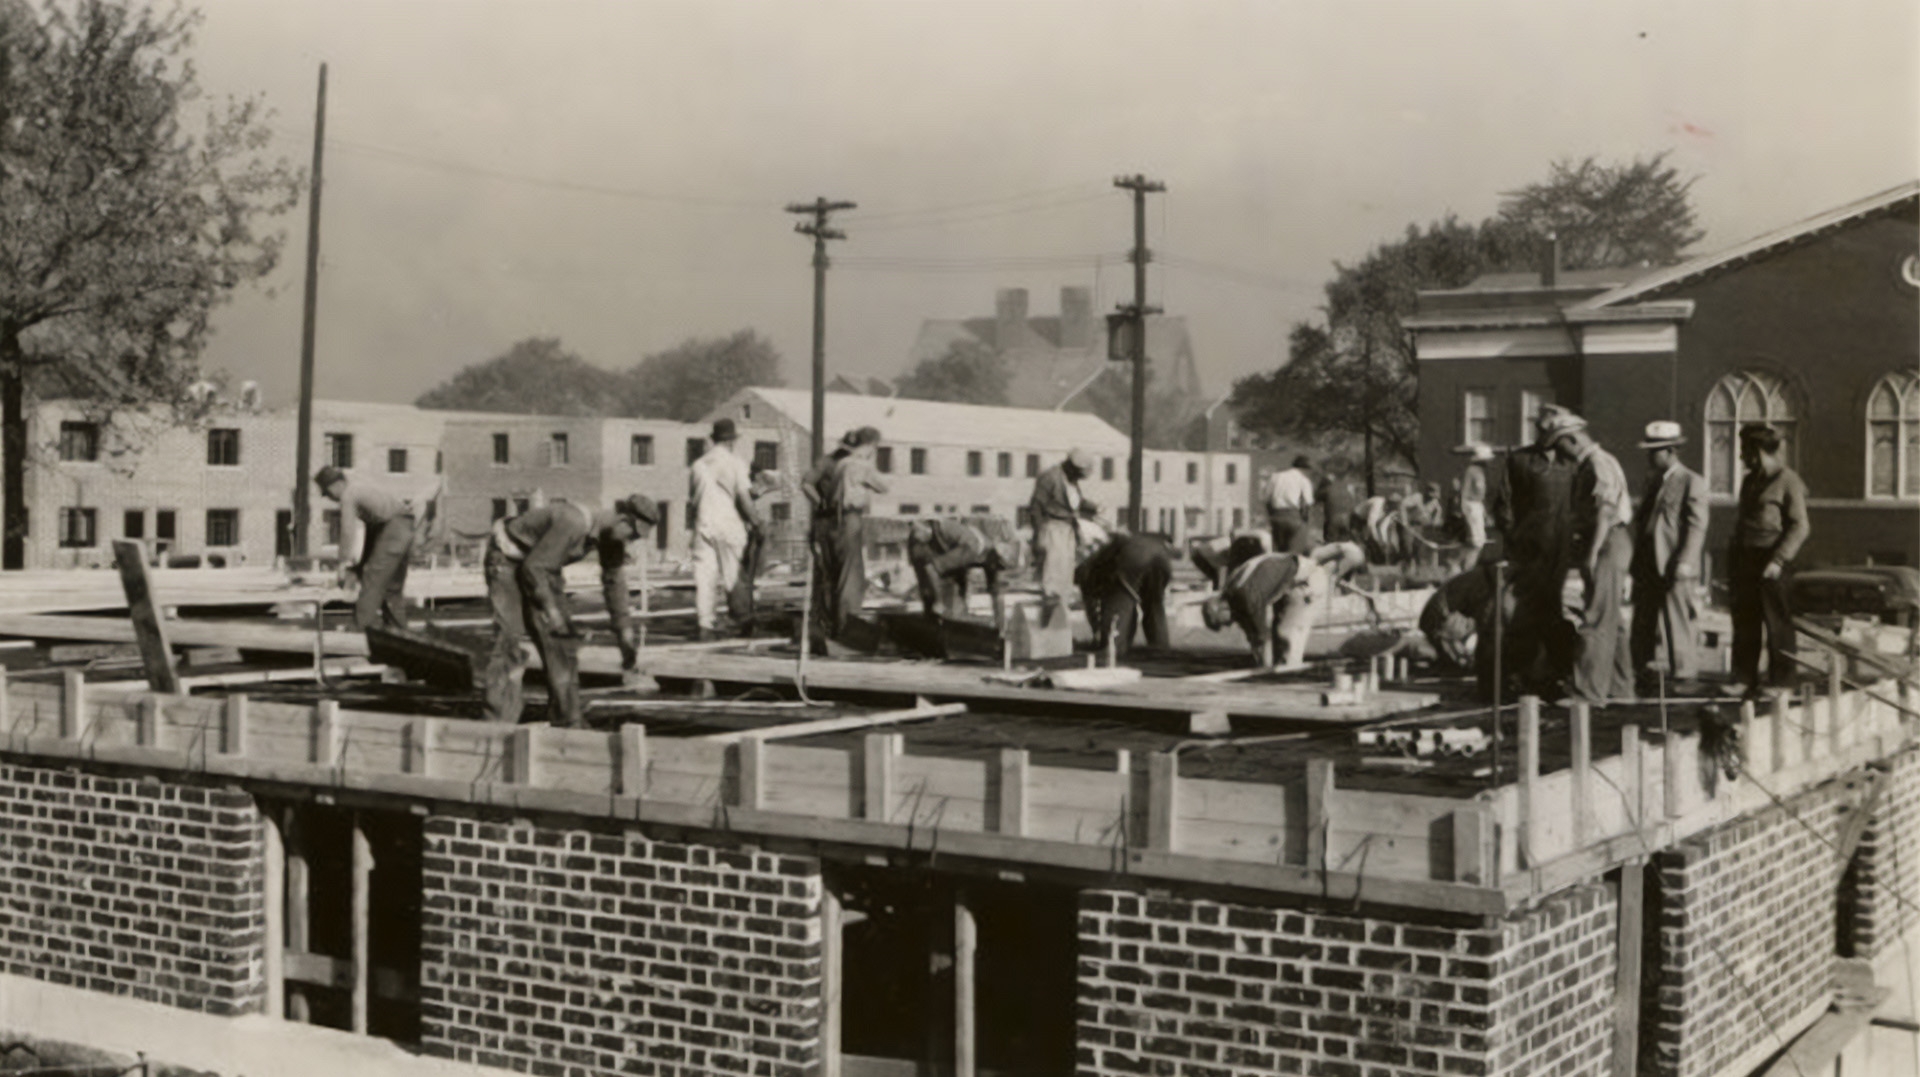 Dated September 22, 1939, this photograph shows construction workers preparing to pour concrete for the main floor slab of the administration building at Poindexter Village.